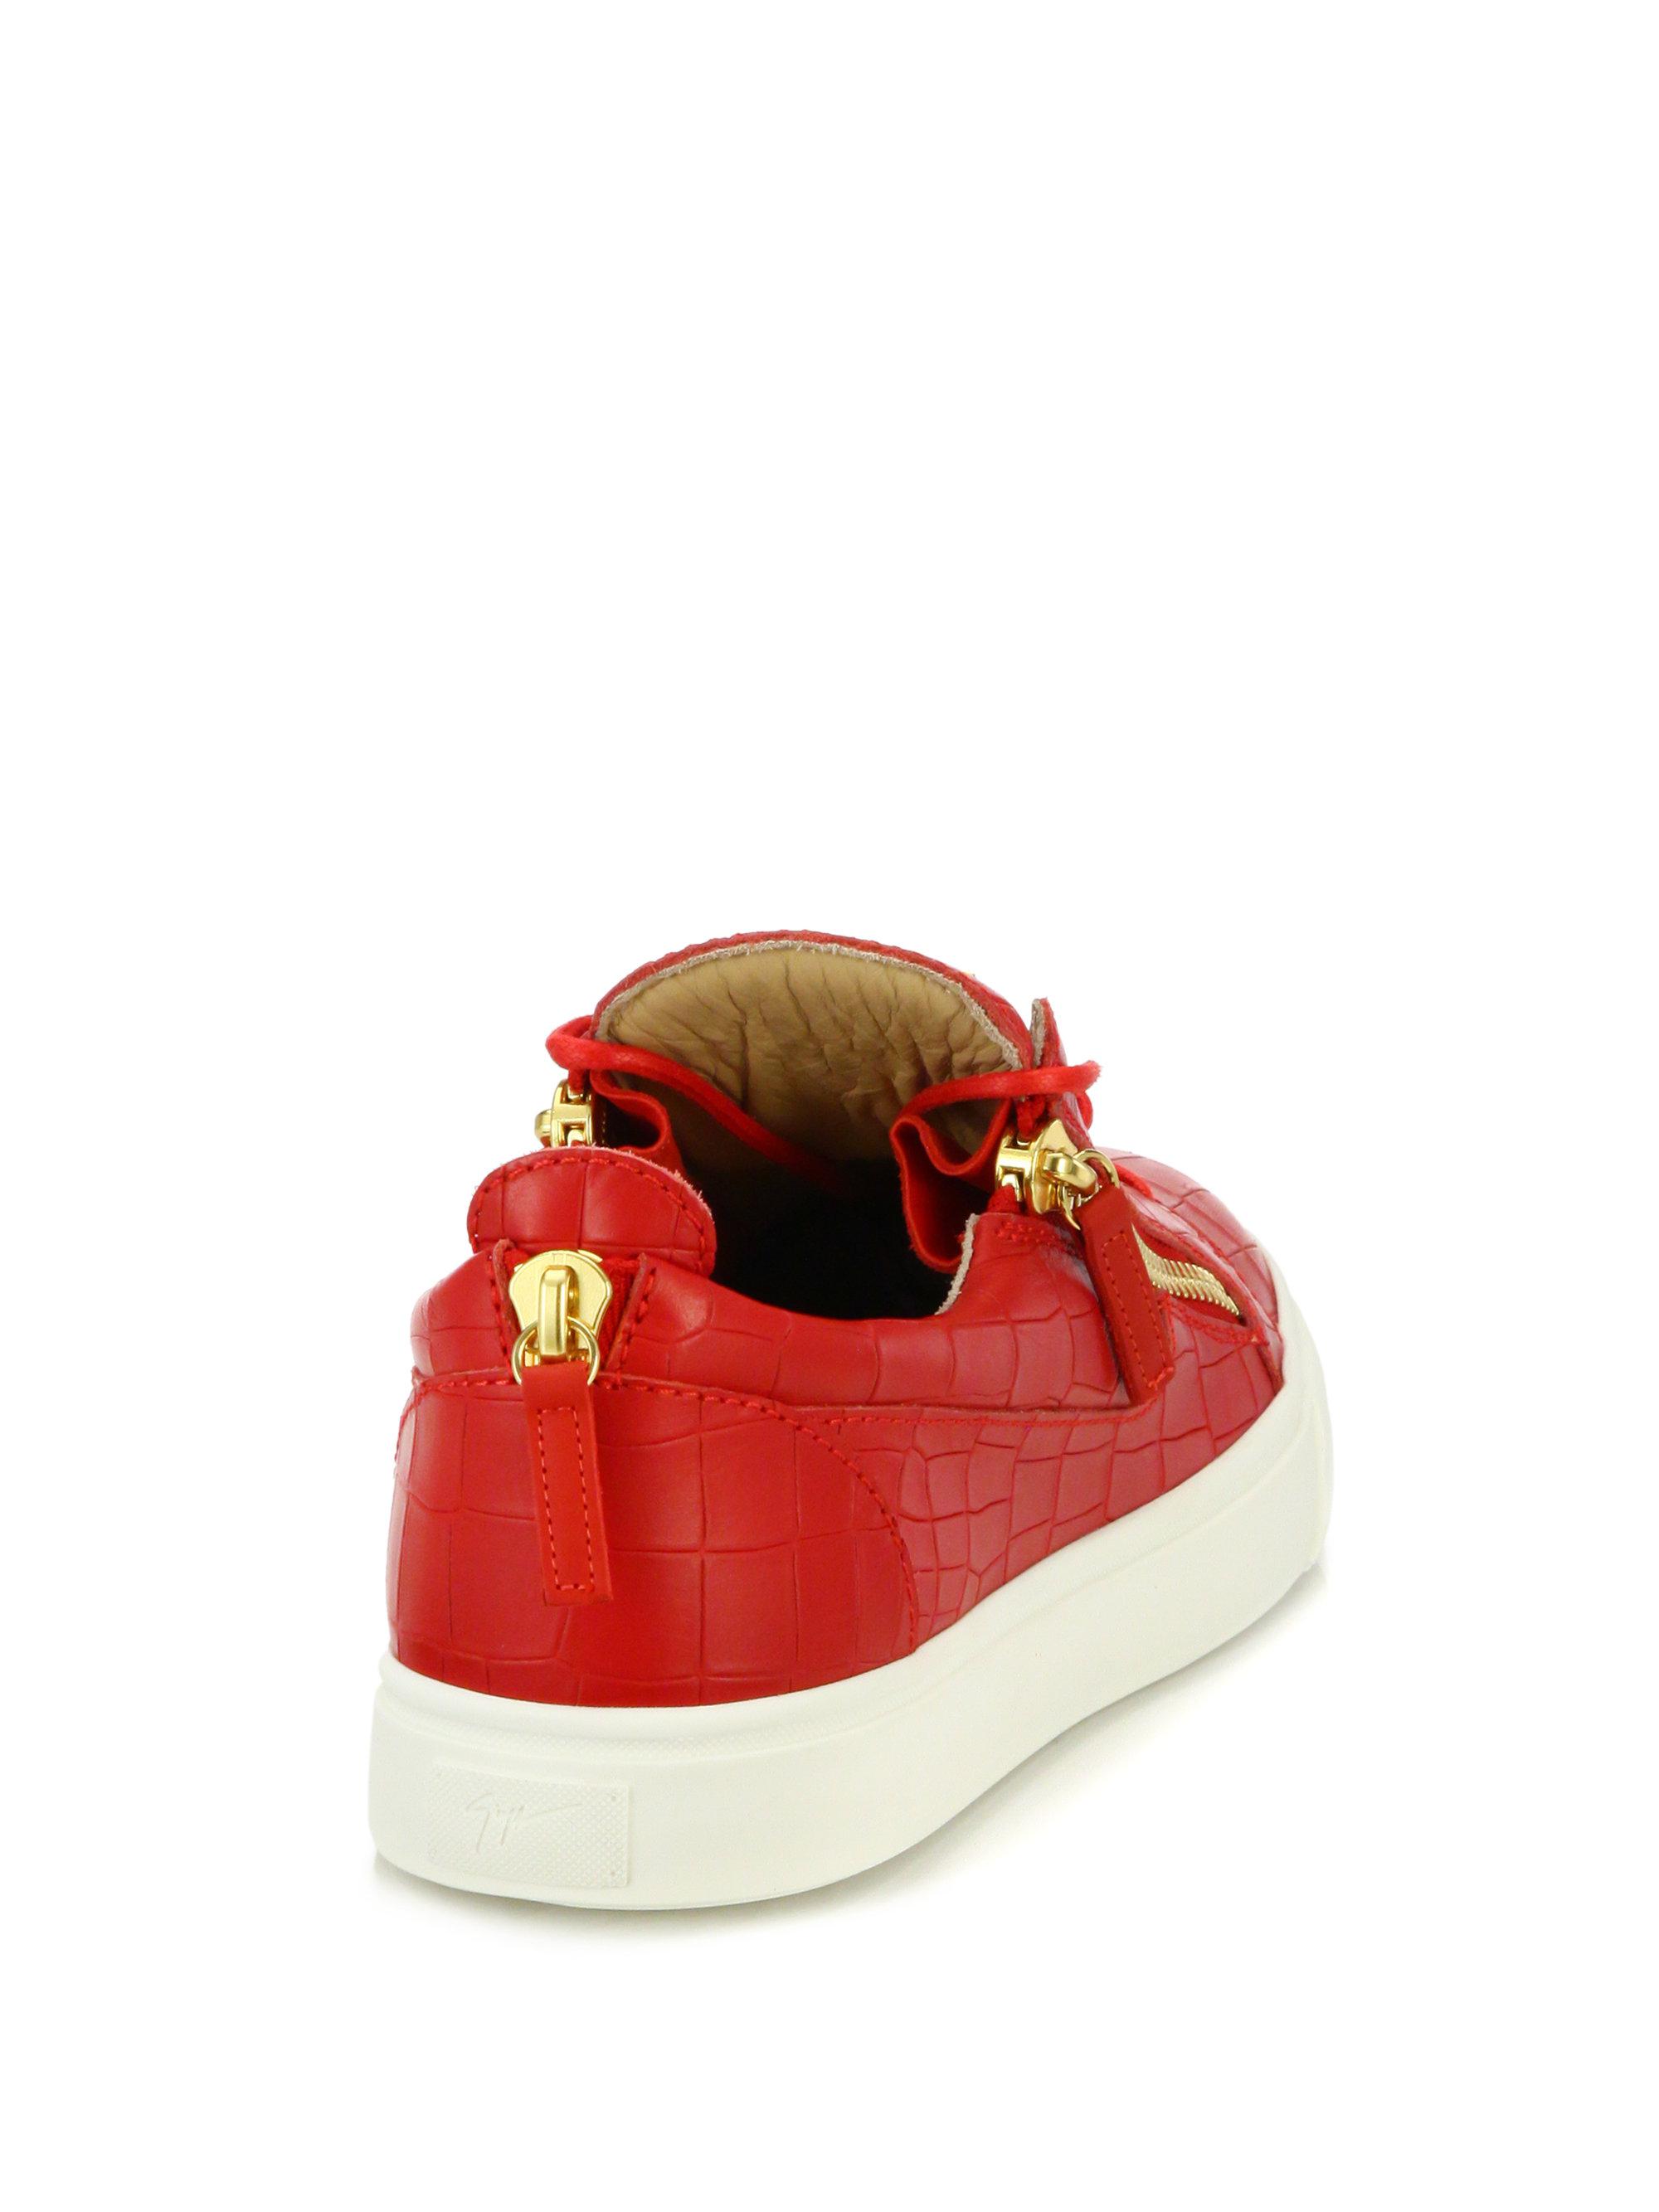 Giuseppe Zanotti Croc-embossed Leather Double-zip Low-top Sneakers in Red  for Men - Lyst